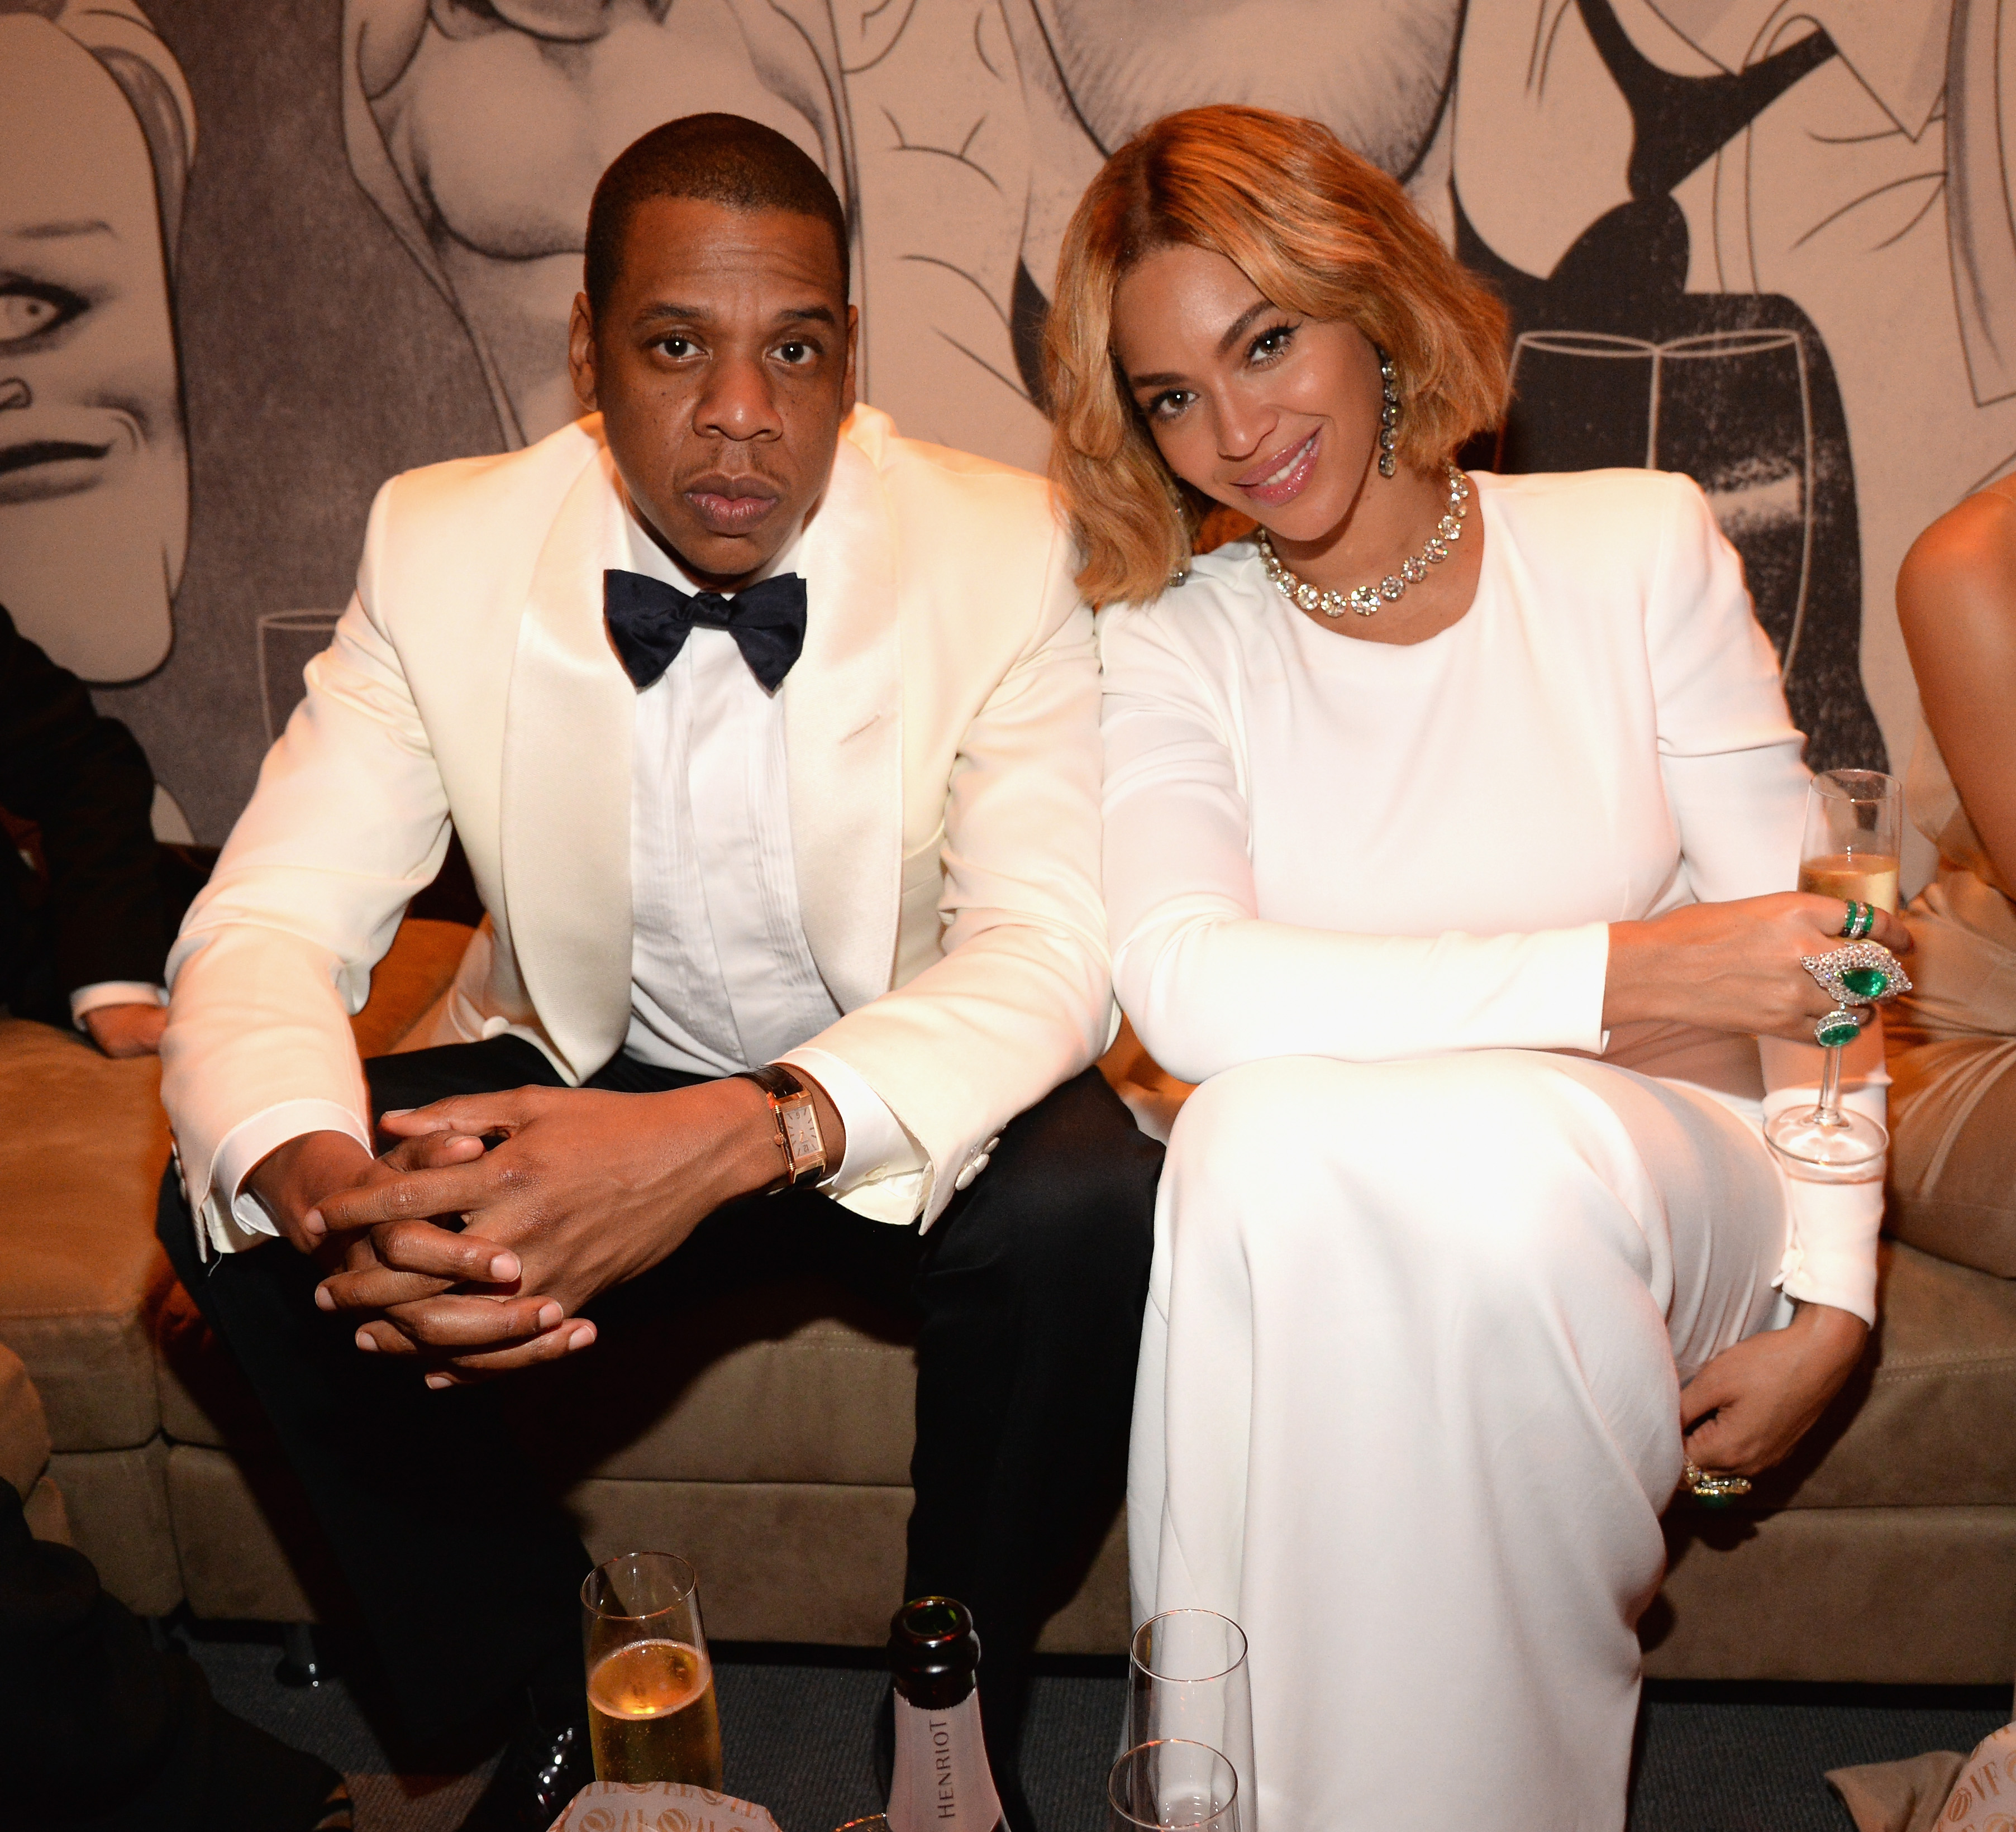 Jay Z and Beyonce attend the 2015 Vanity Fair Oscar Party on February 22, 2015 in Beverly Hills, California. (Photo by Kevin Mazur/VF15/WireImage) (Kevin Mazur—VF15/WireImage)